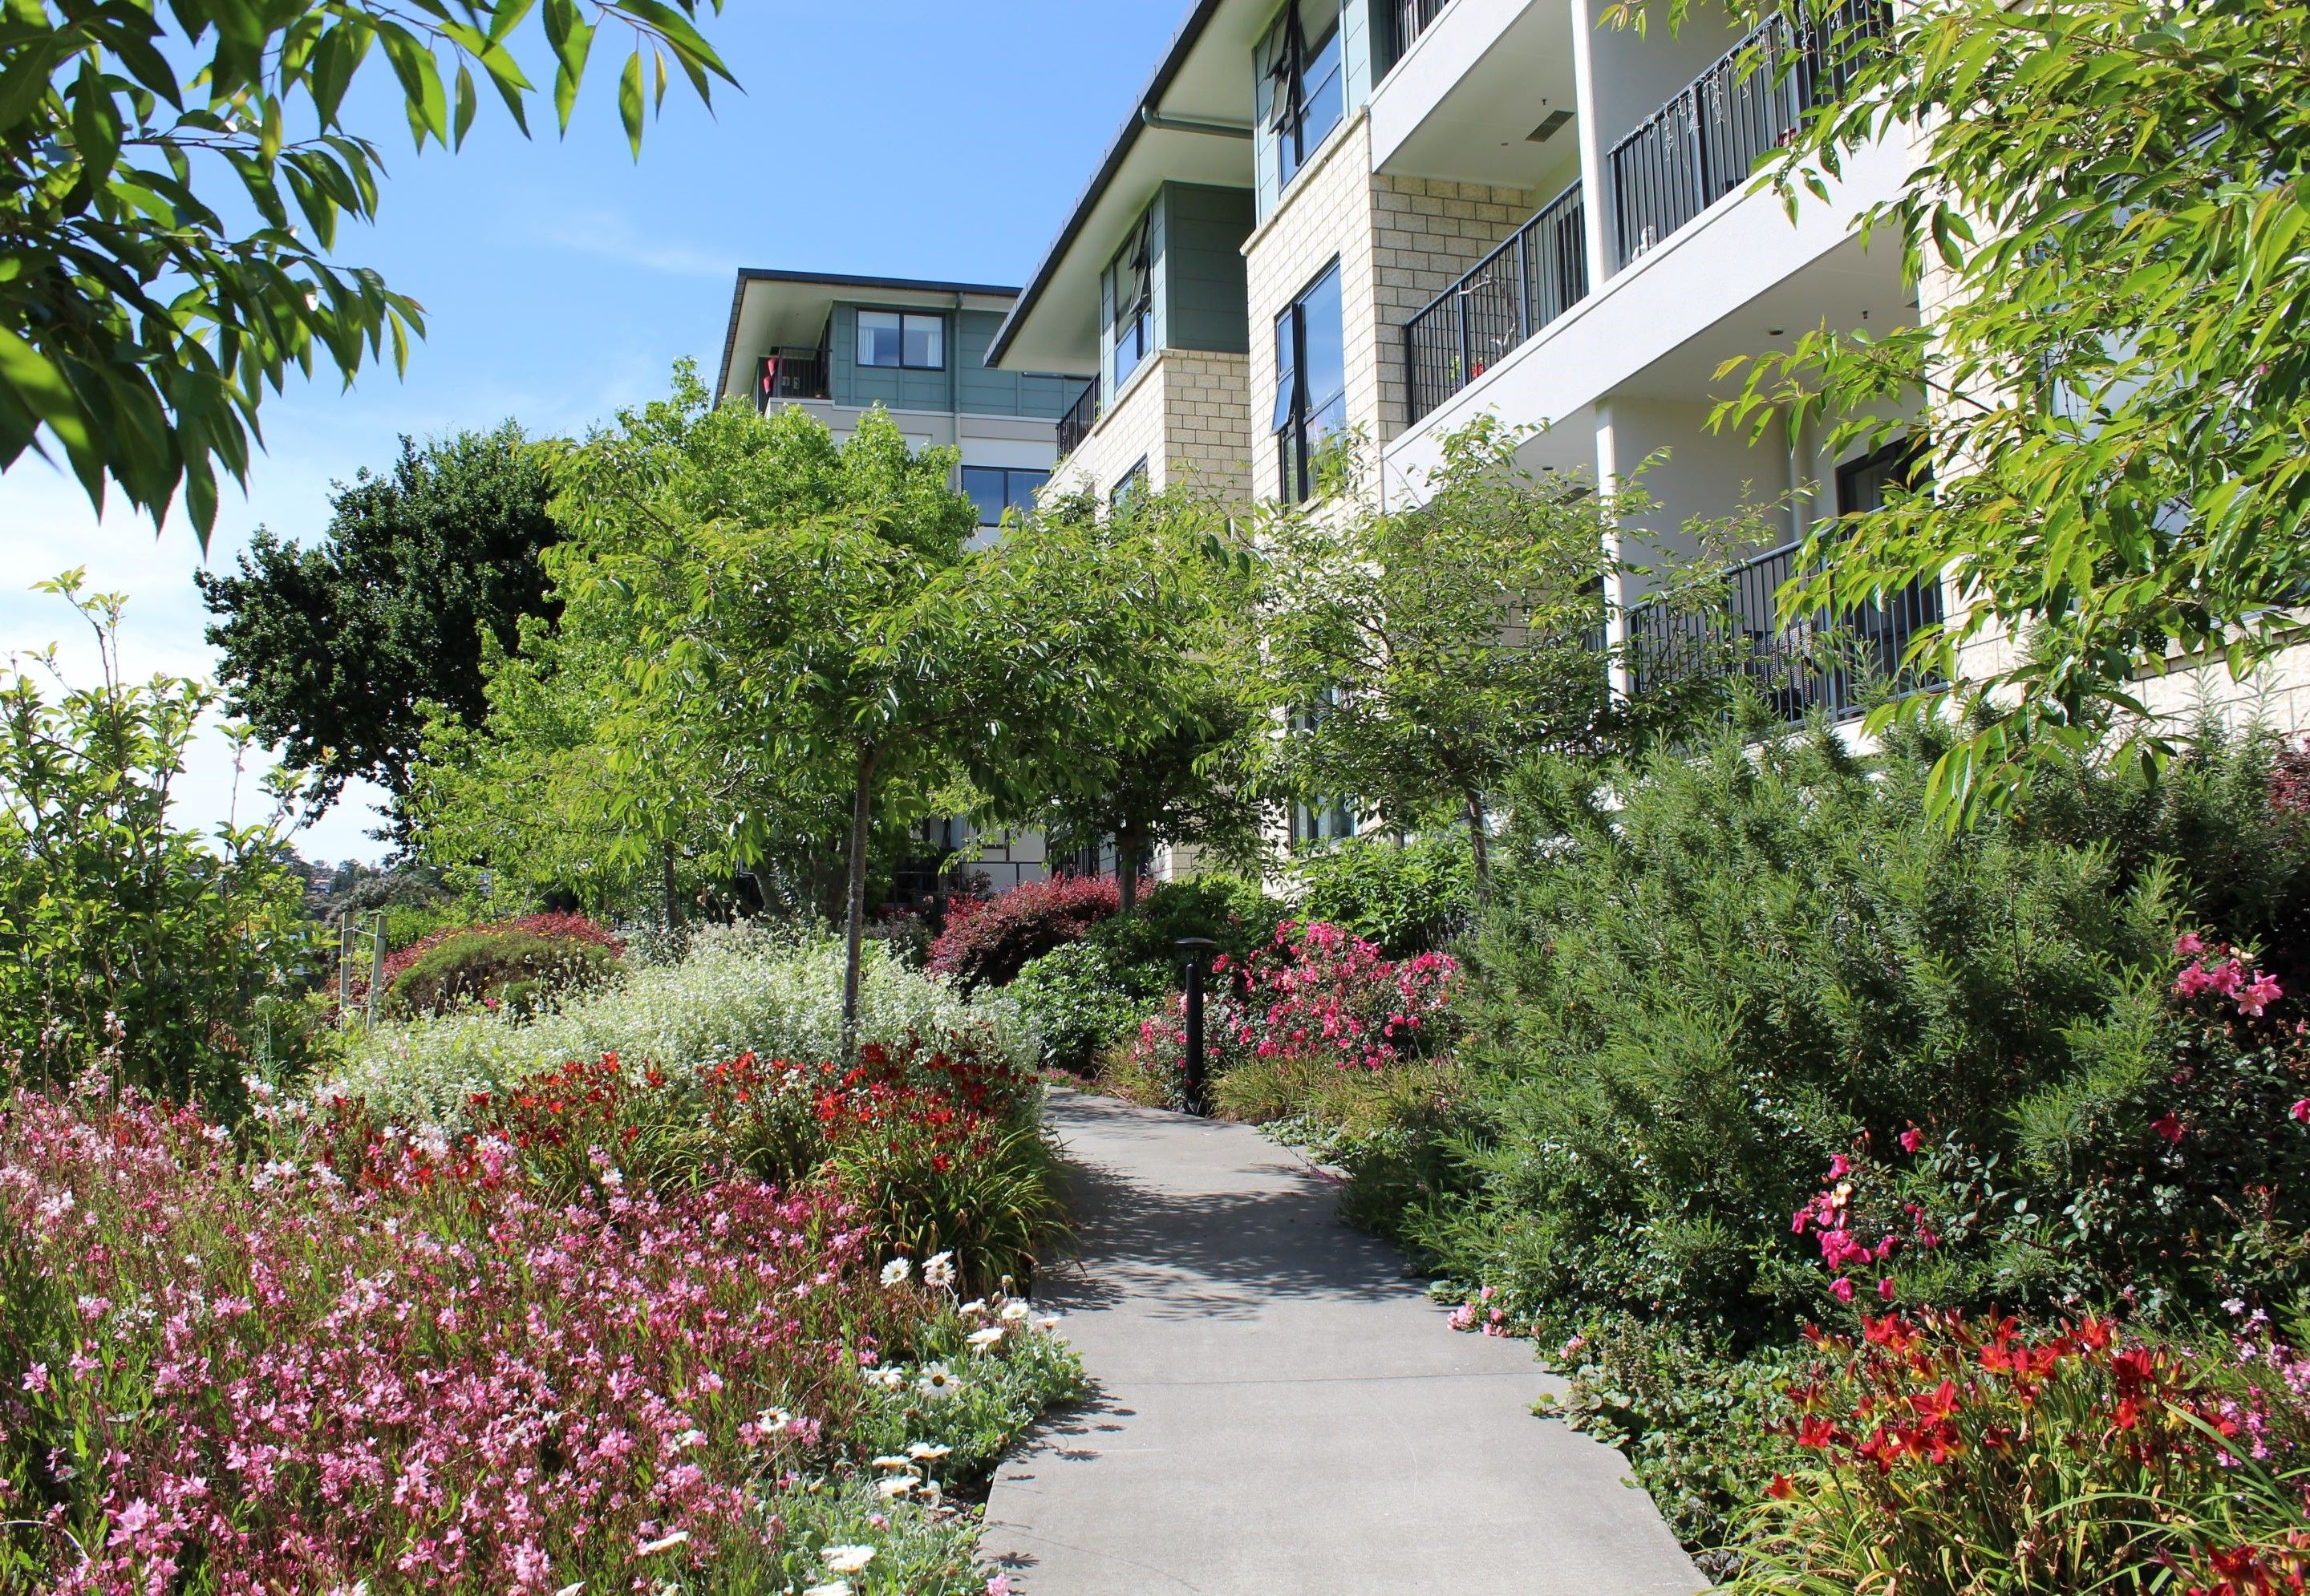 Retirement Village on the North Shore - The Orchards